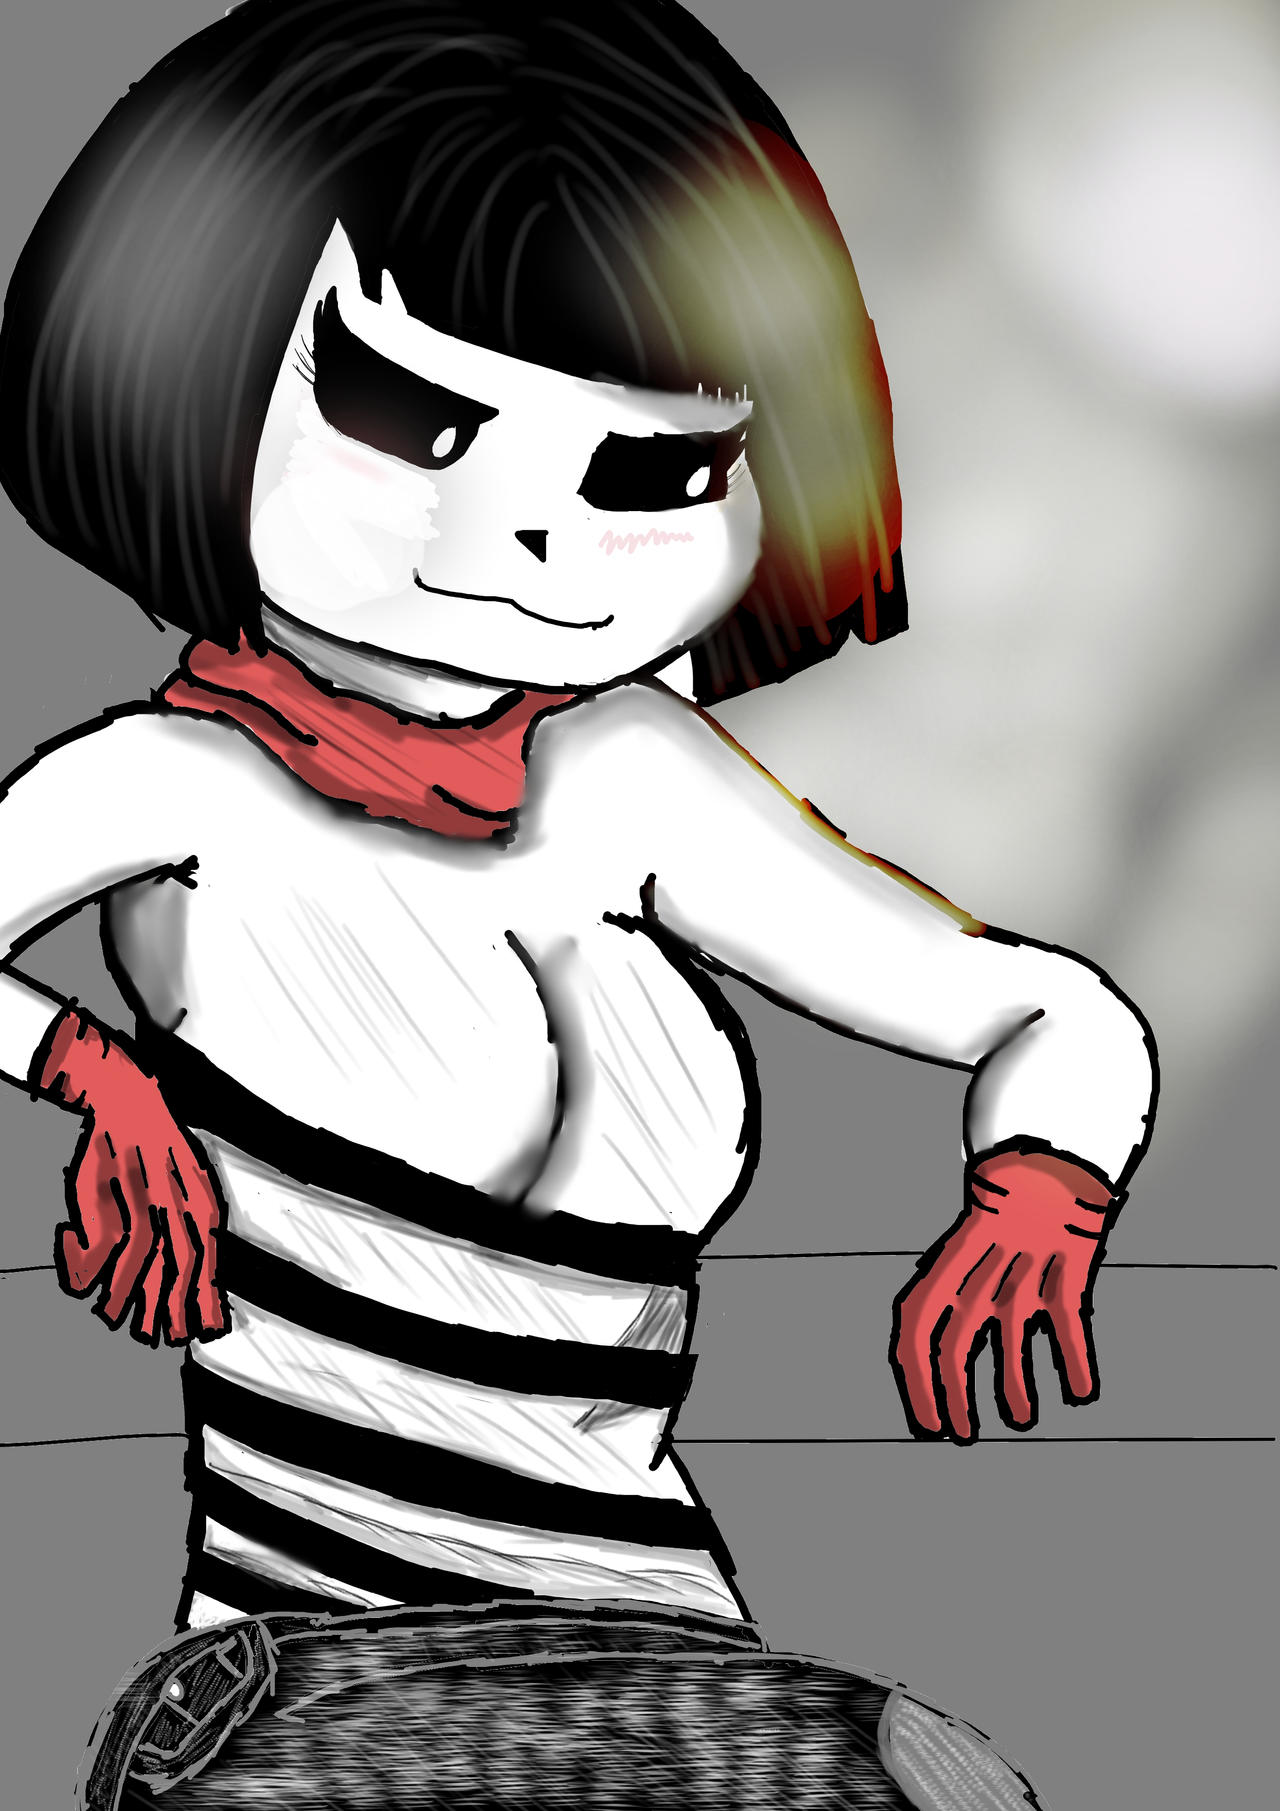 mime and Dash #animation #mrbrauza #sus, mime and dash